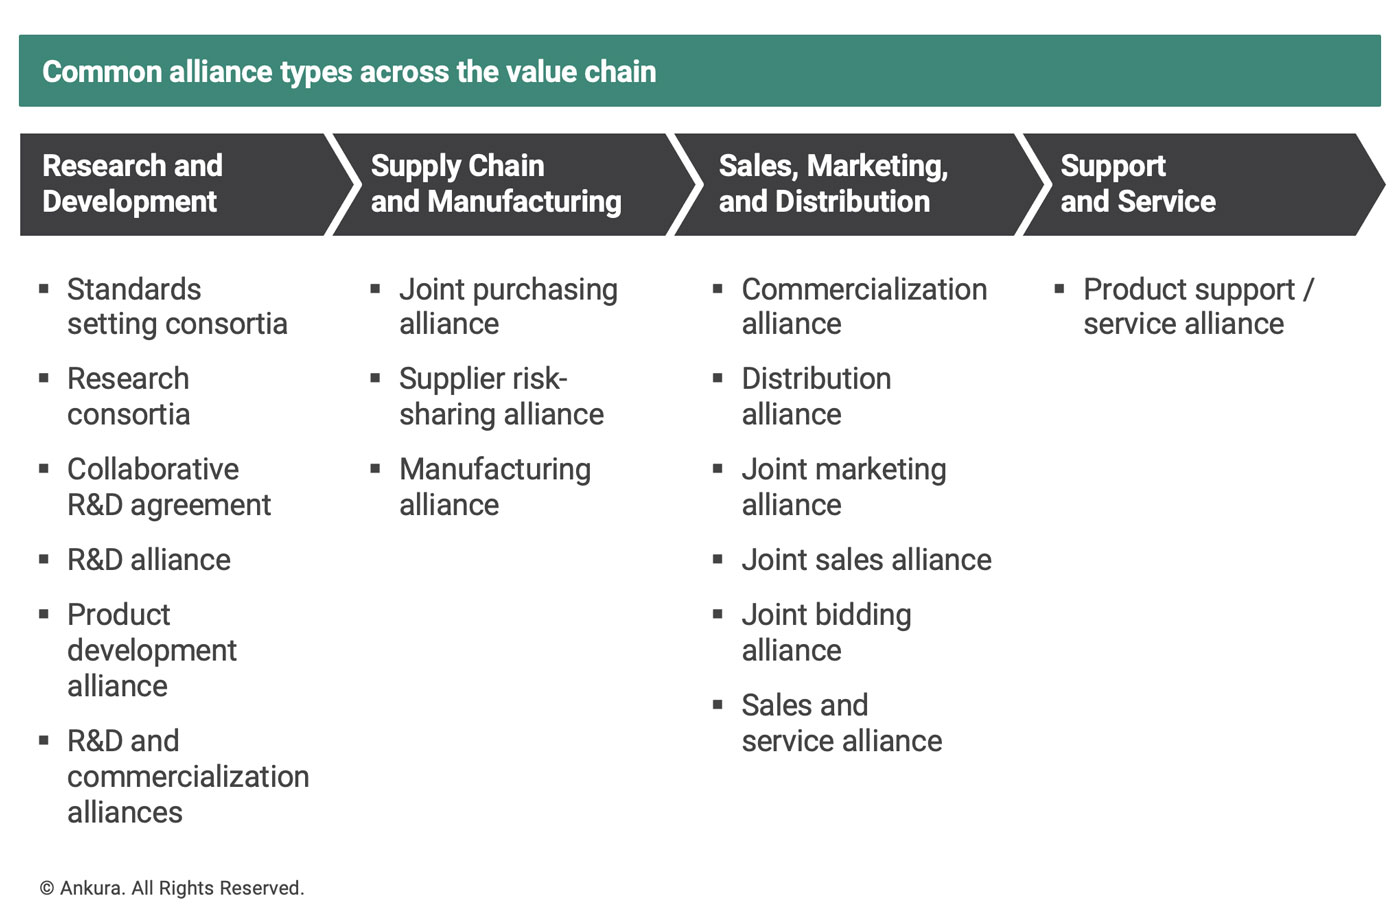 Exhibit 2: Different Types of Alliances Based on Value Chain